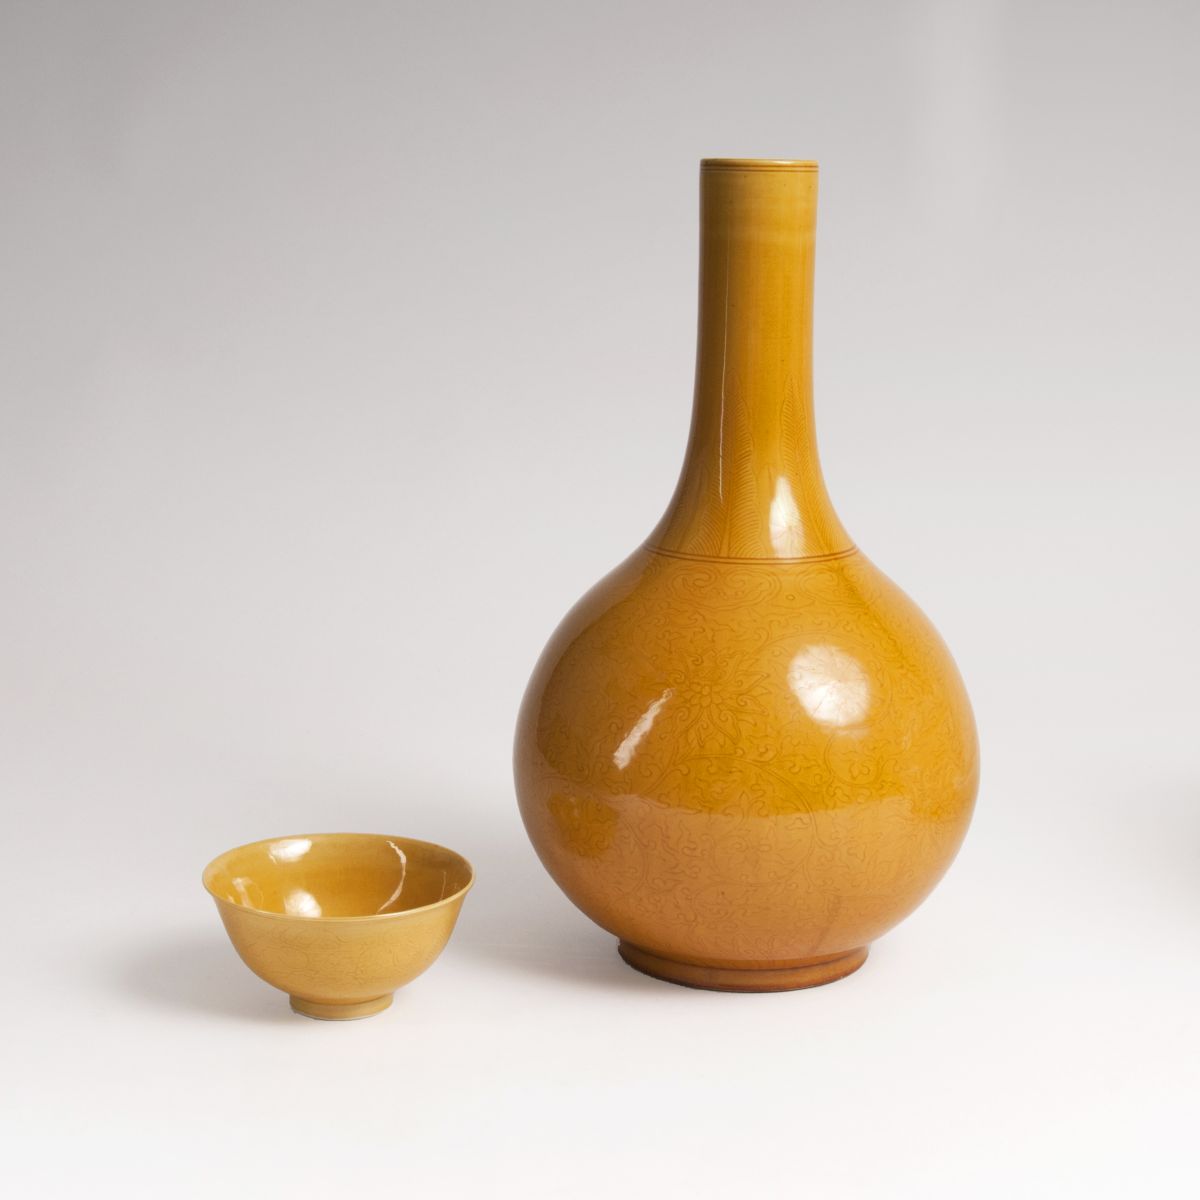 A baluster-shaped vase and bowl with yellow glaze